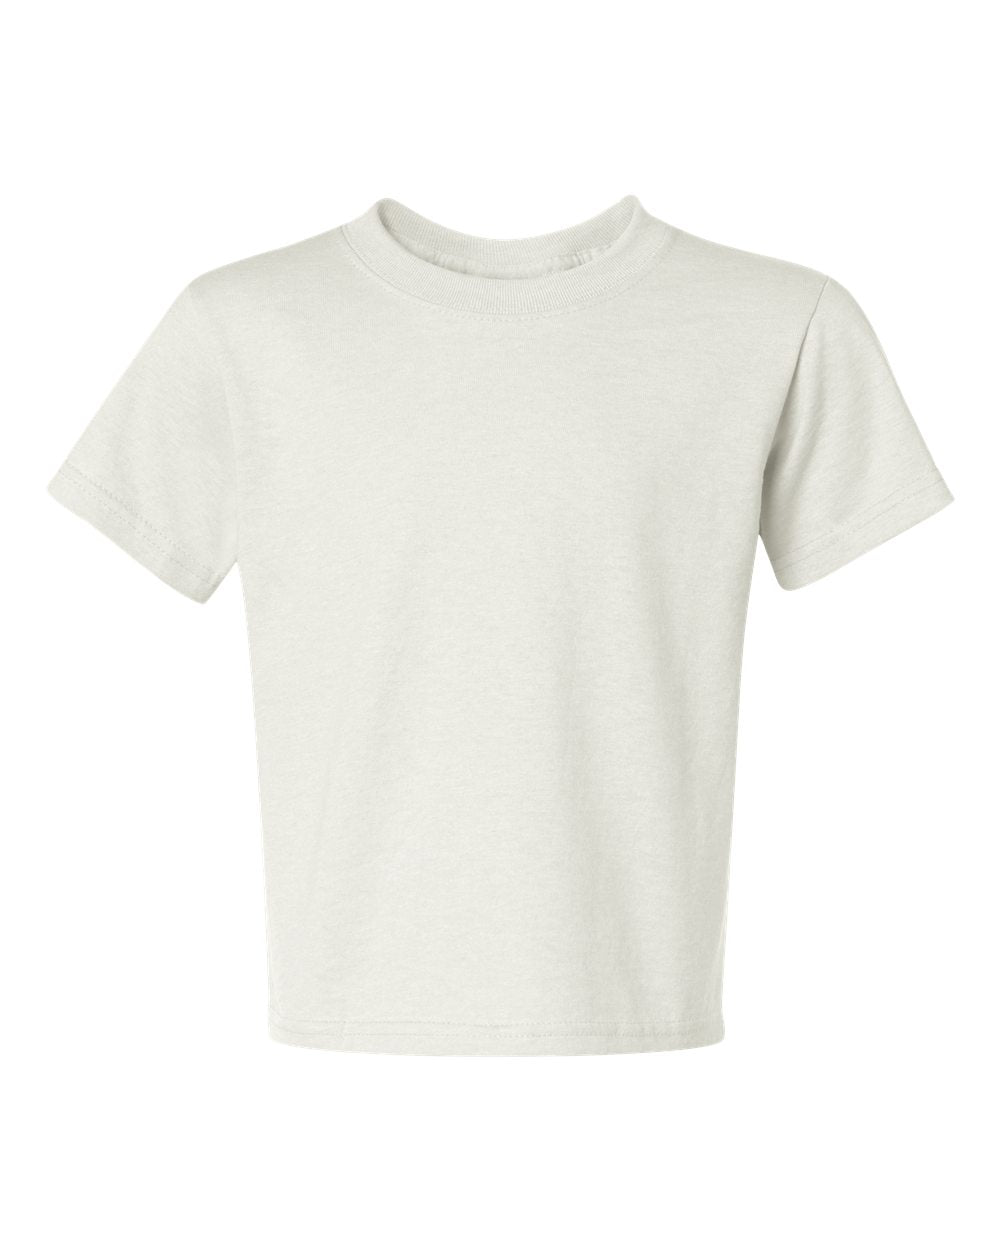 JERZEES Dri-Power® Youth 50/50 T-Shirt 29BR #color_White